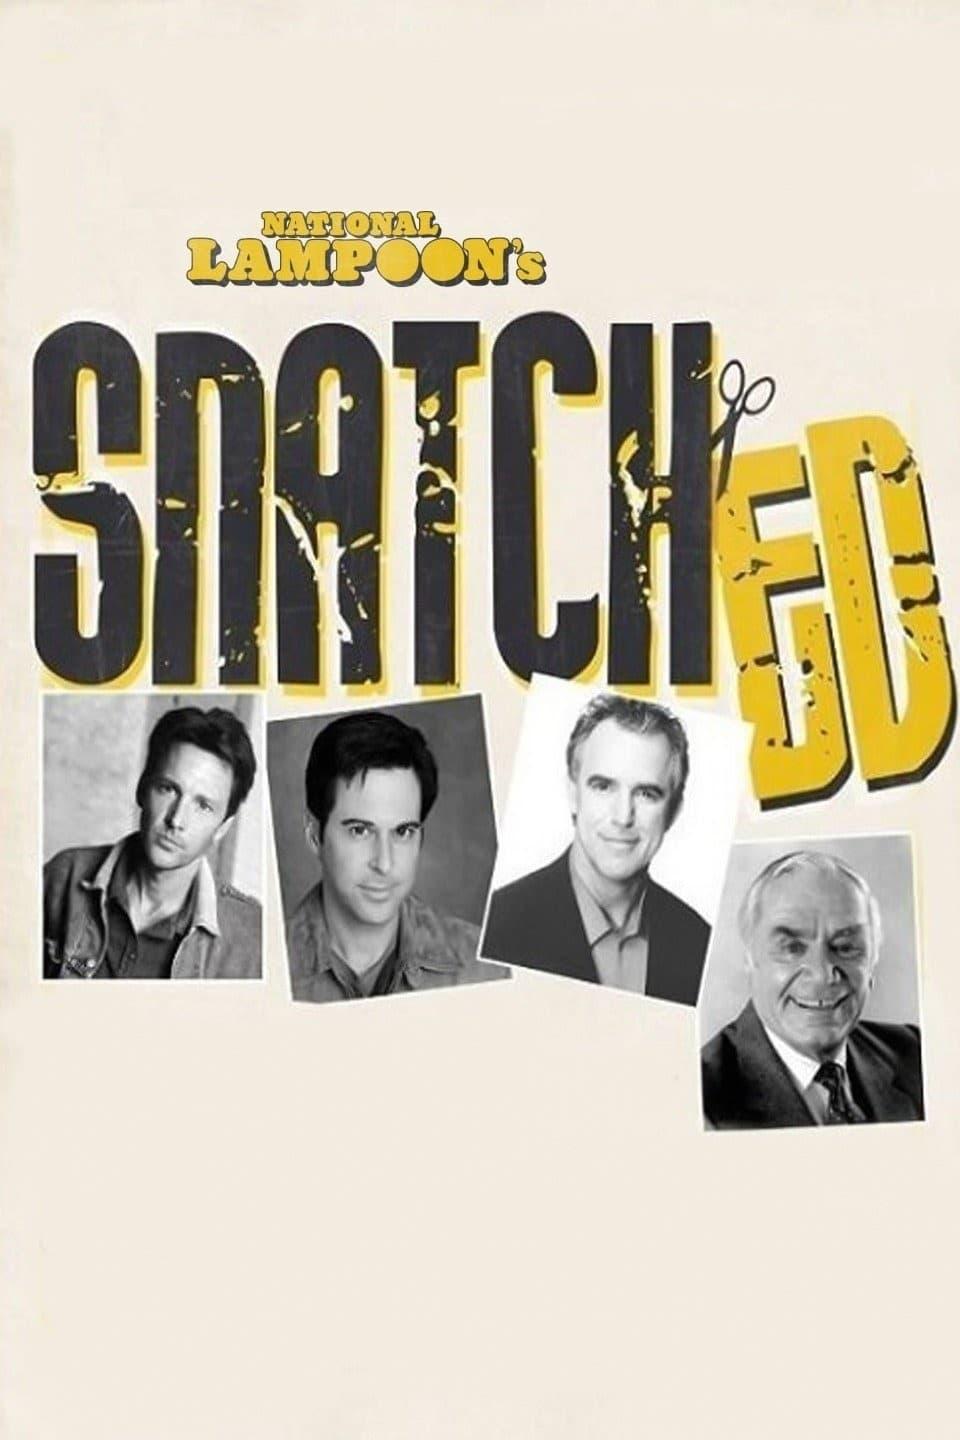 National Lampoon's Snatched poster